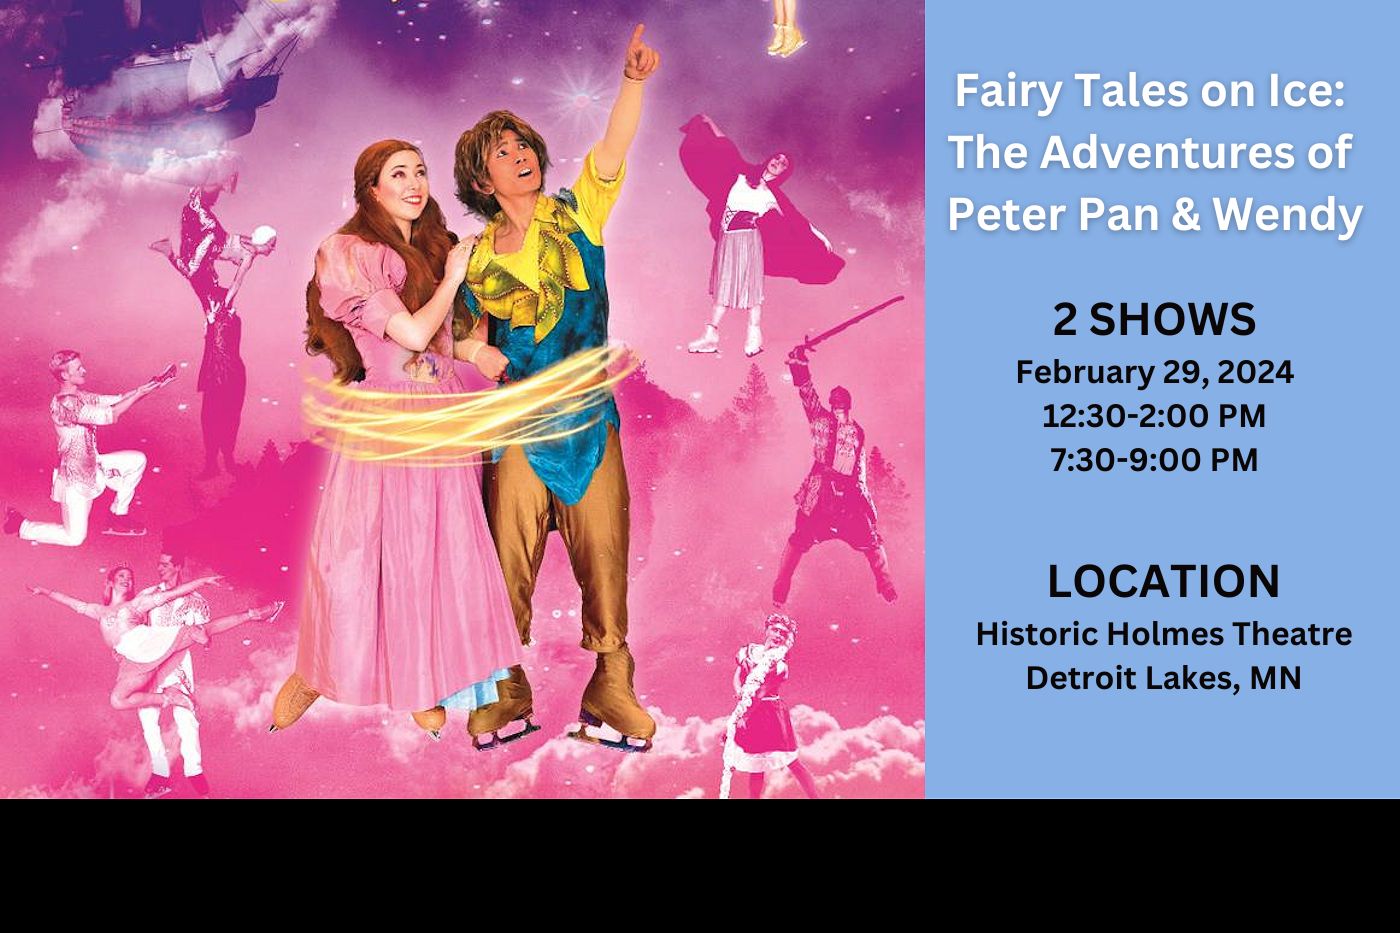 Fairy Tales on Ice: The Adventures of Peter Pan & Wendy - 2 Shows